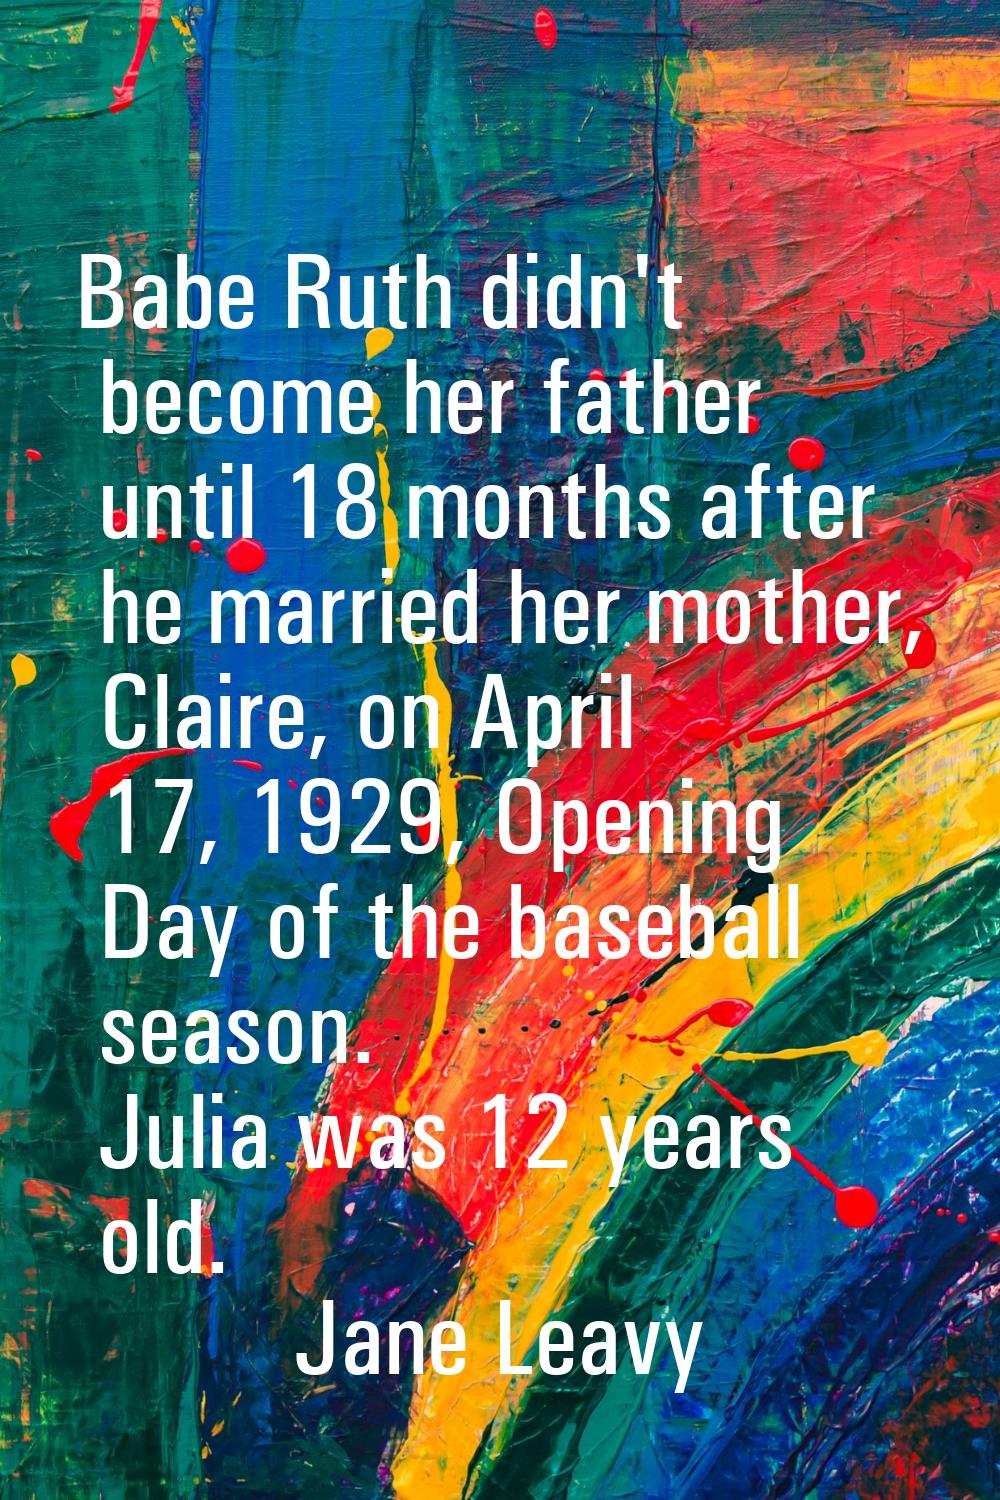 Babe Ruth didn't become her father until 18 months after he married her mother, Claire, on April 17